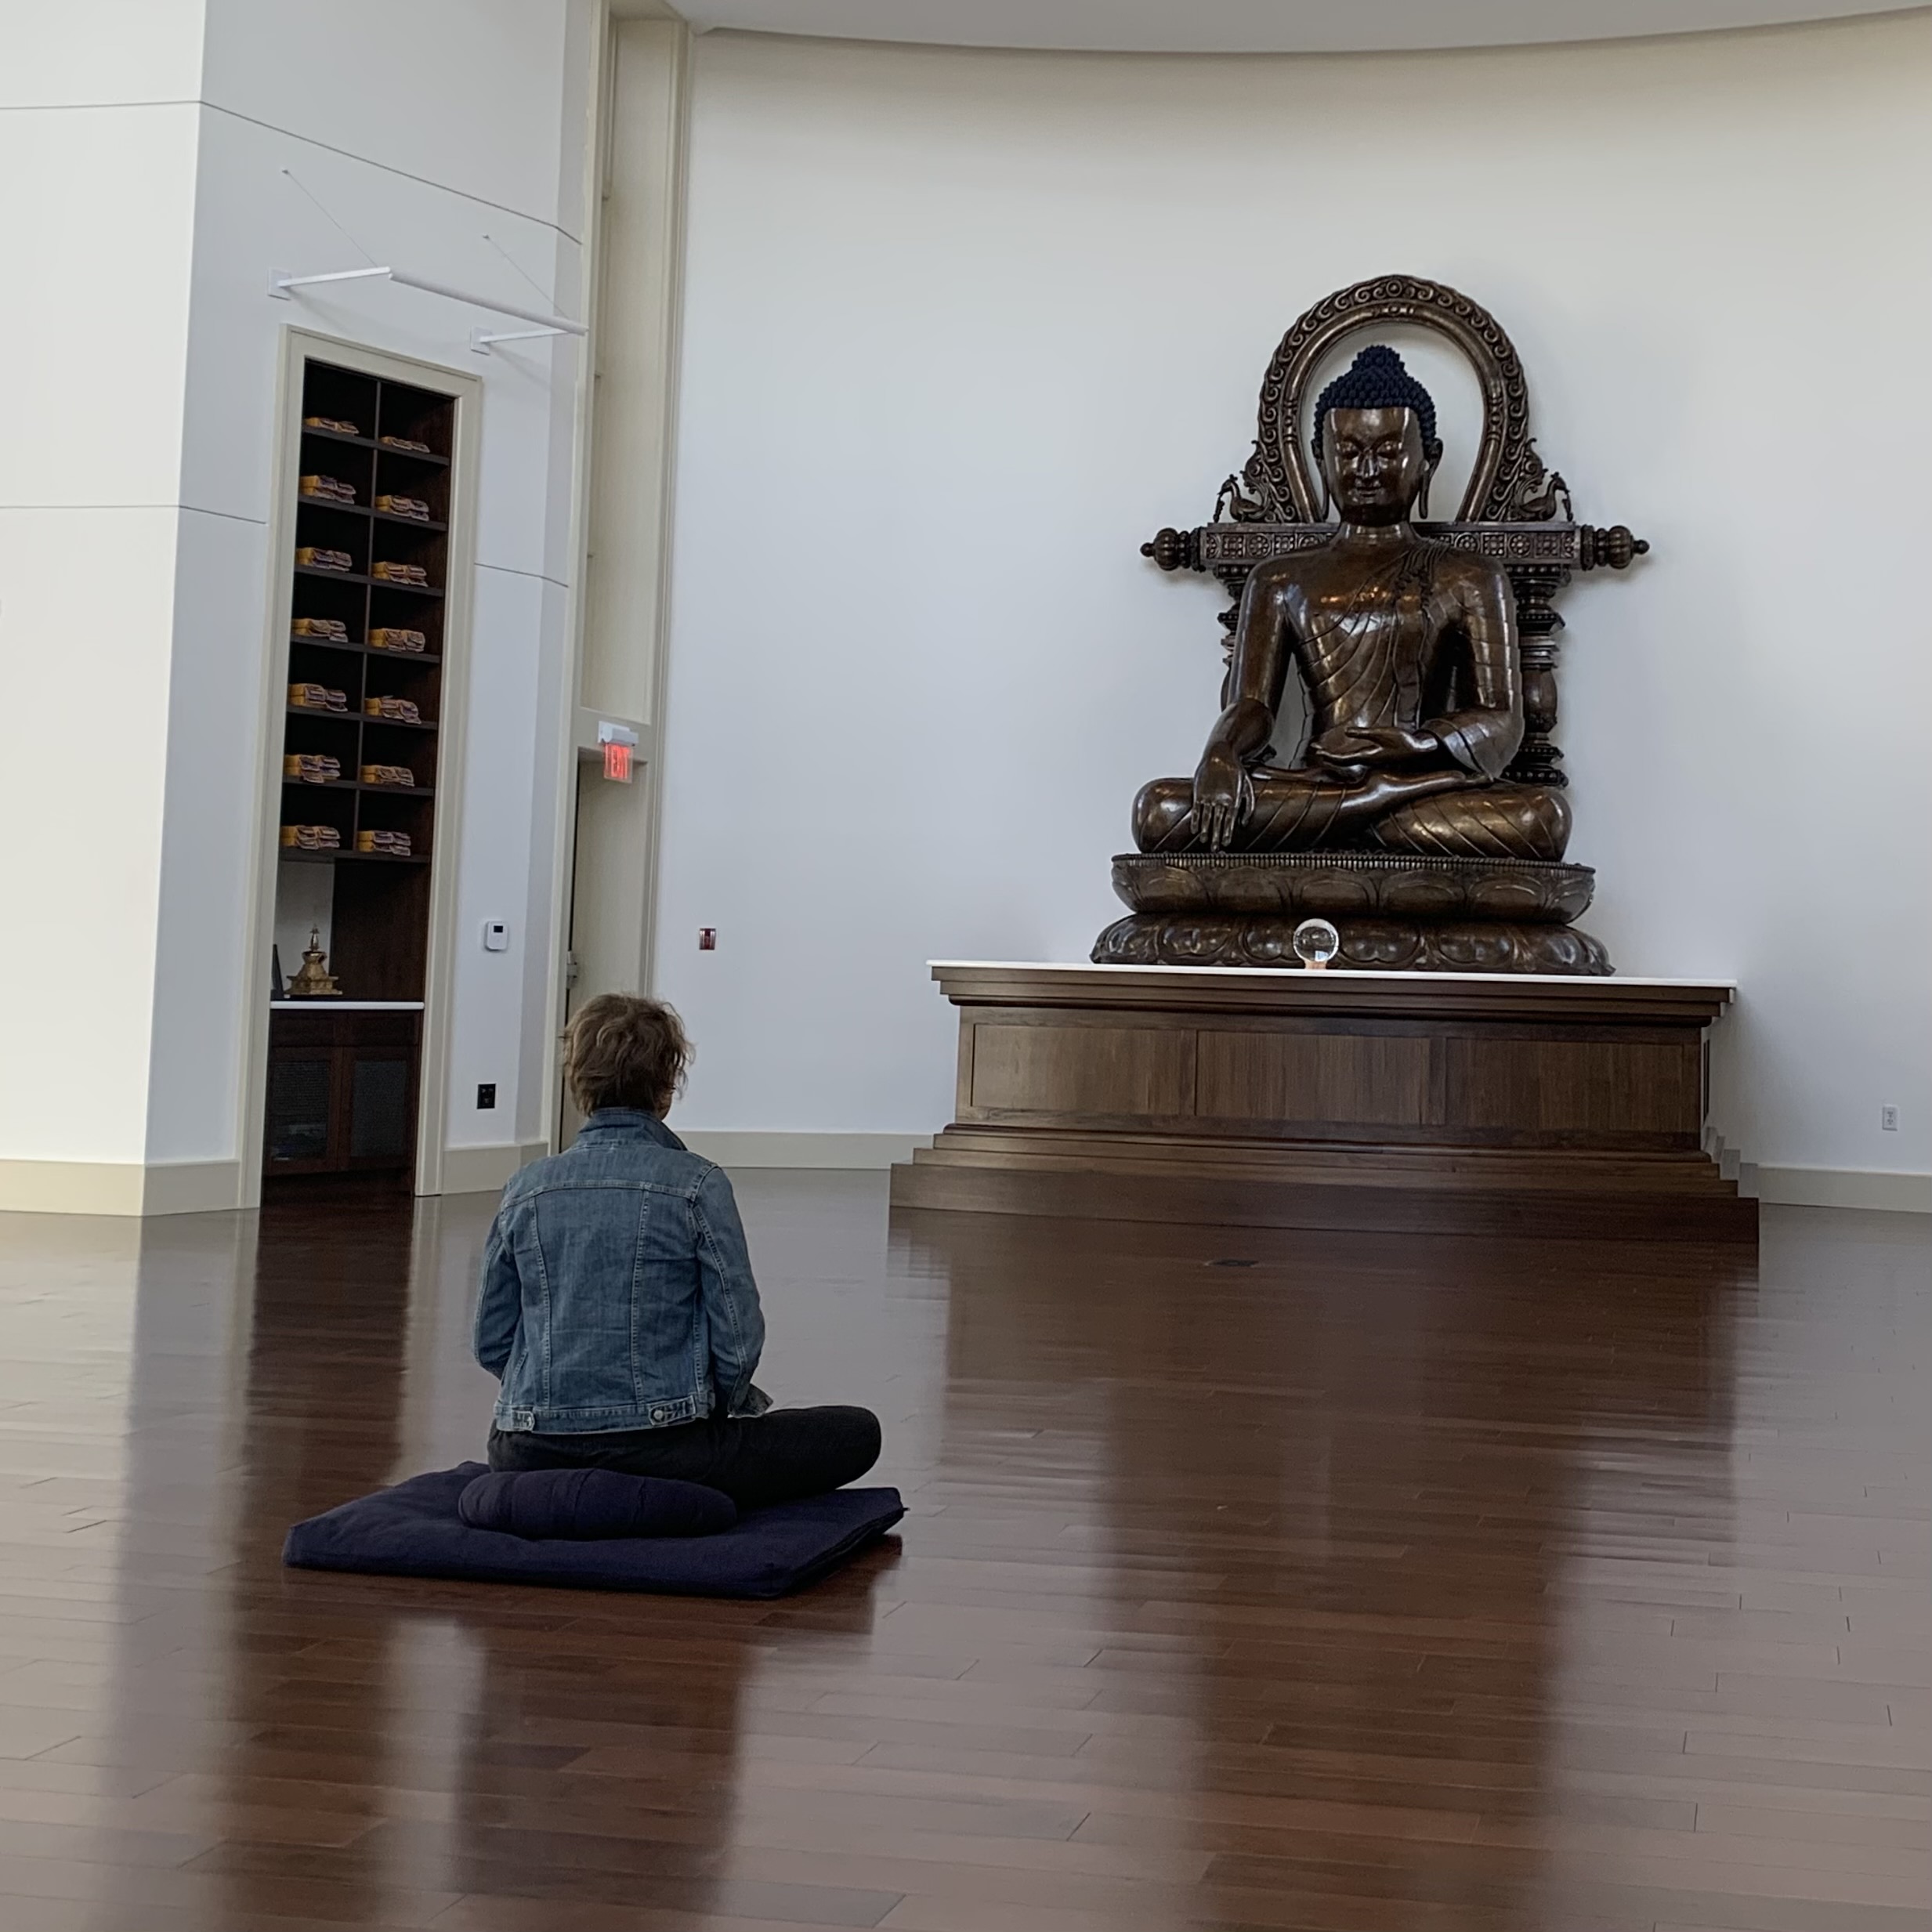 Woman meditating in frotn of a large bronze Buddha